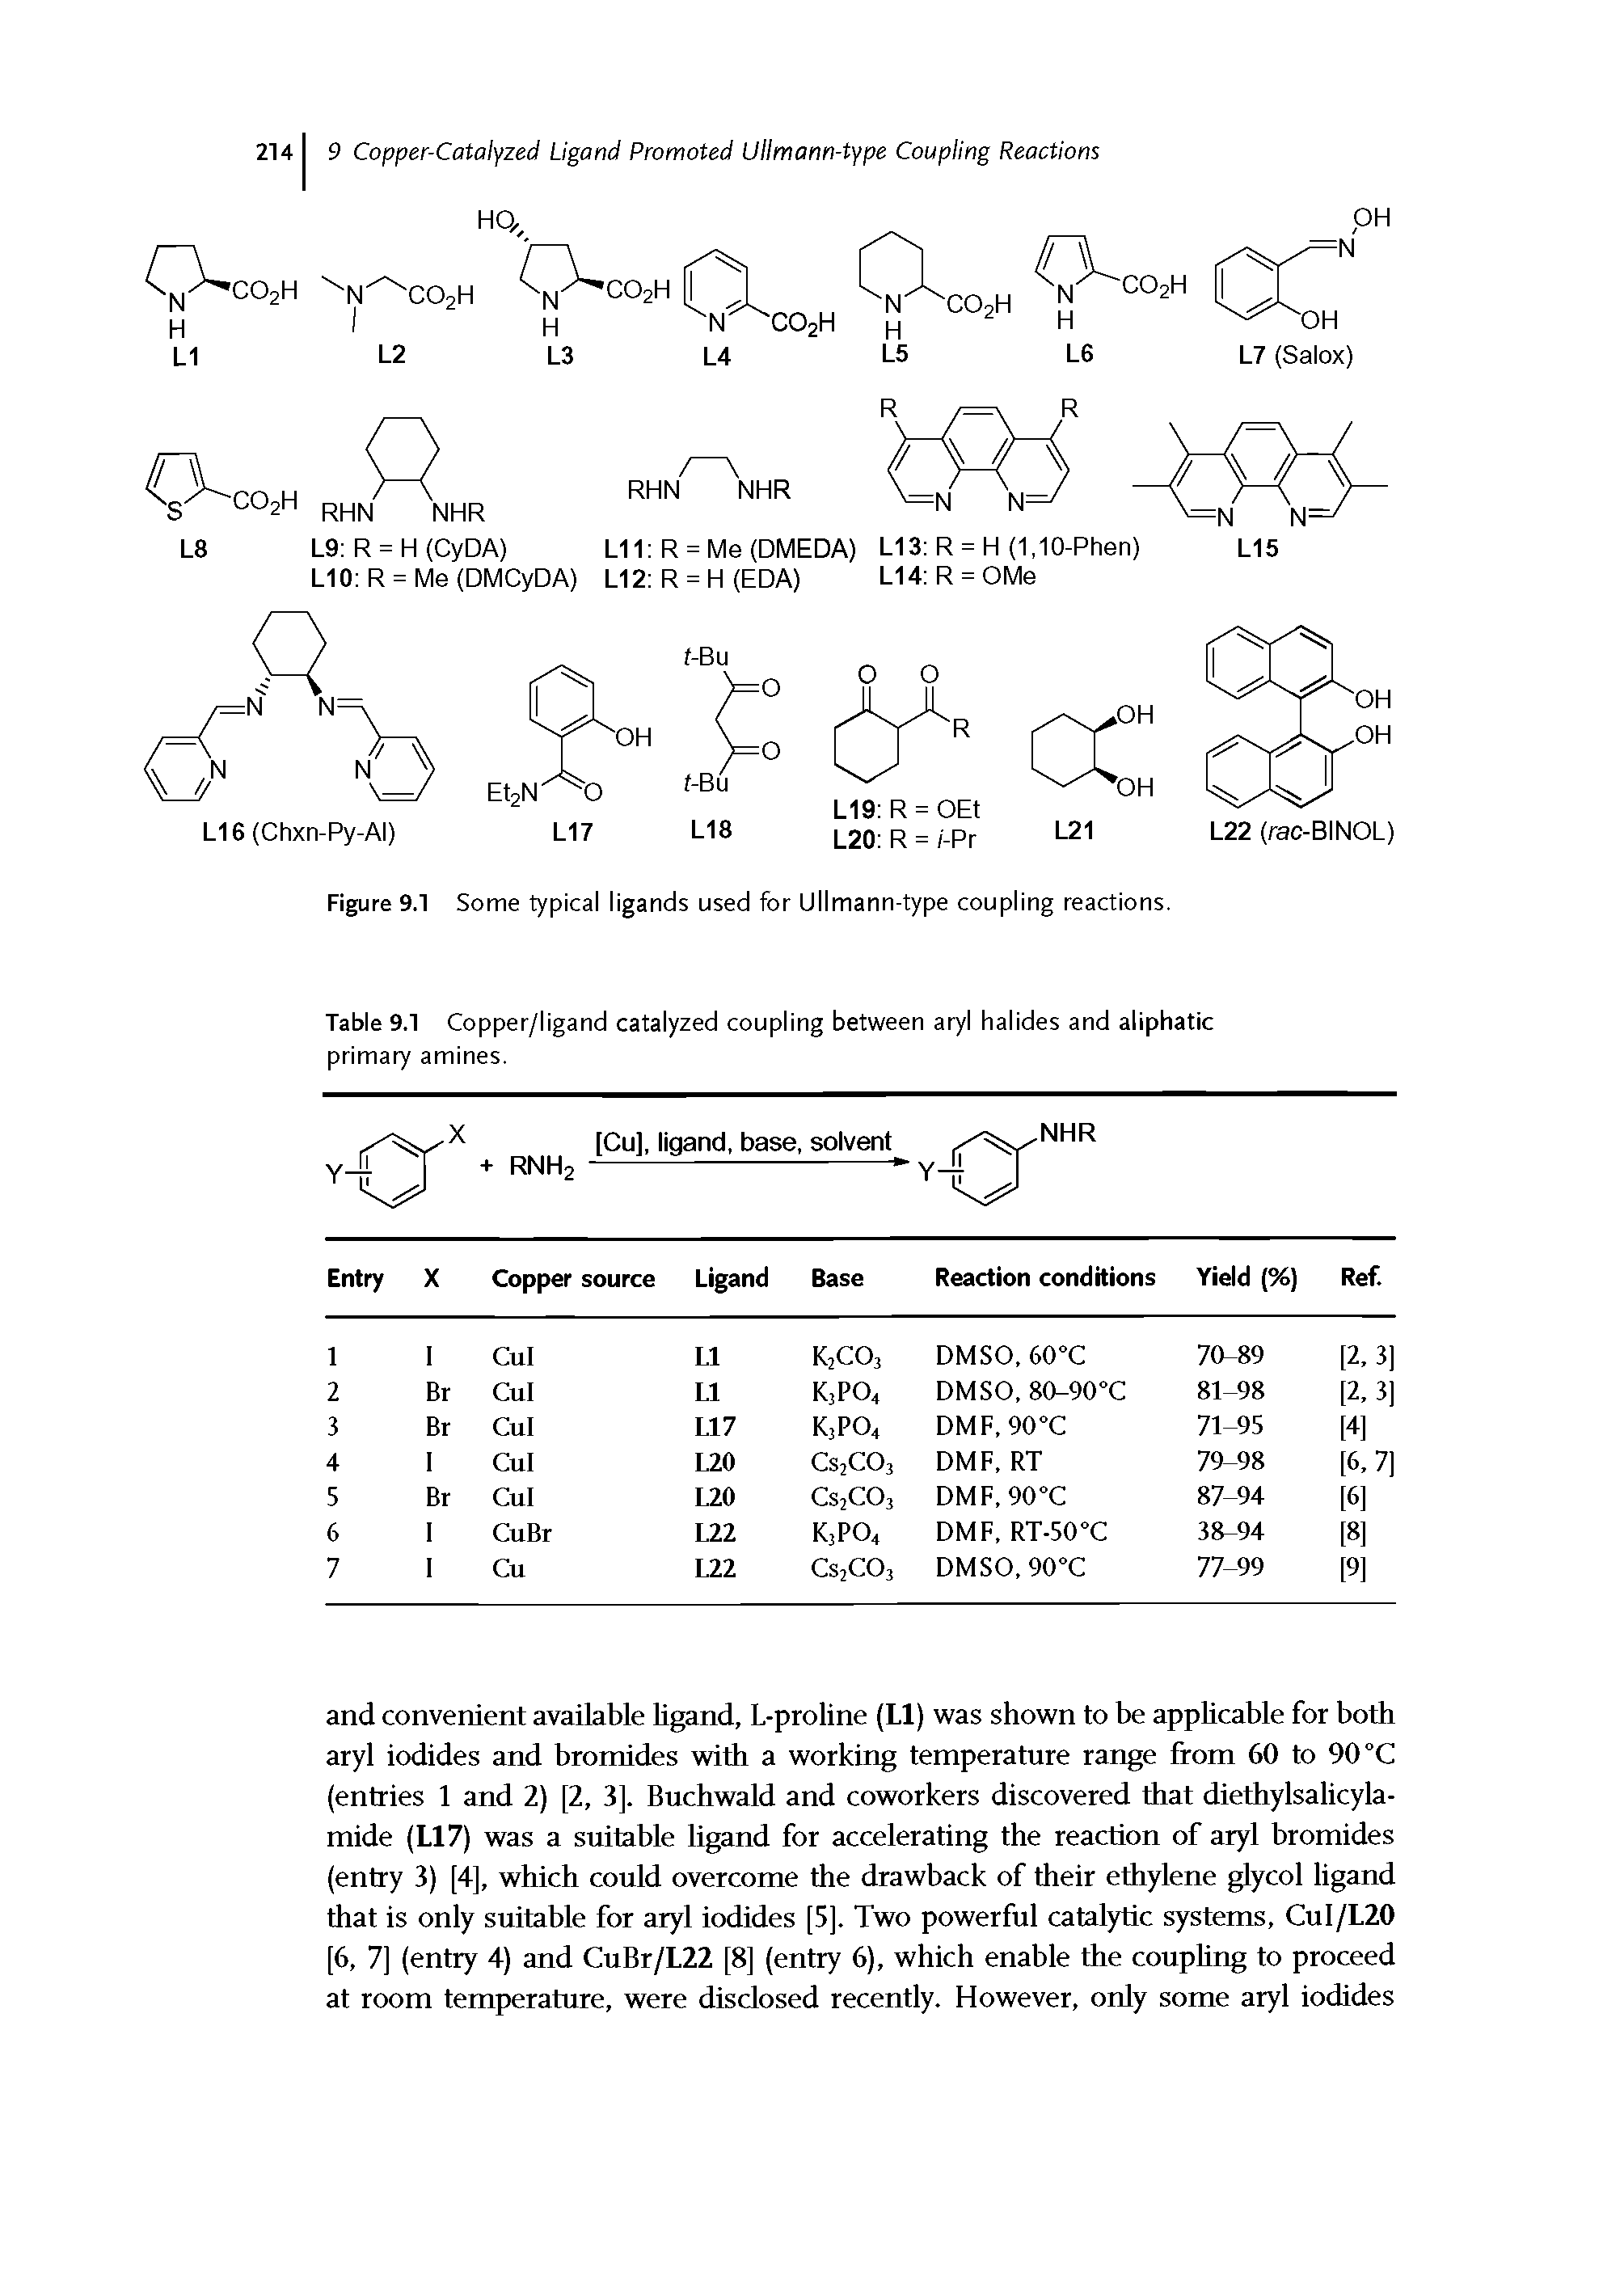 Figure 9.1 Some typical ligands used for Ullmann-type coupling reactions.